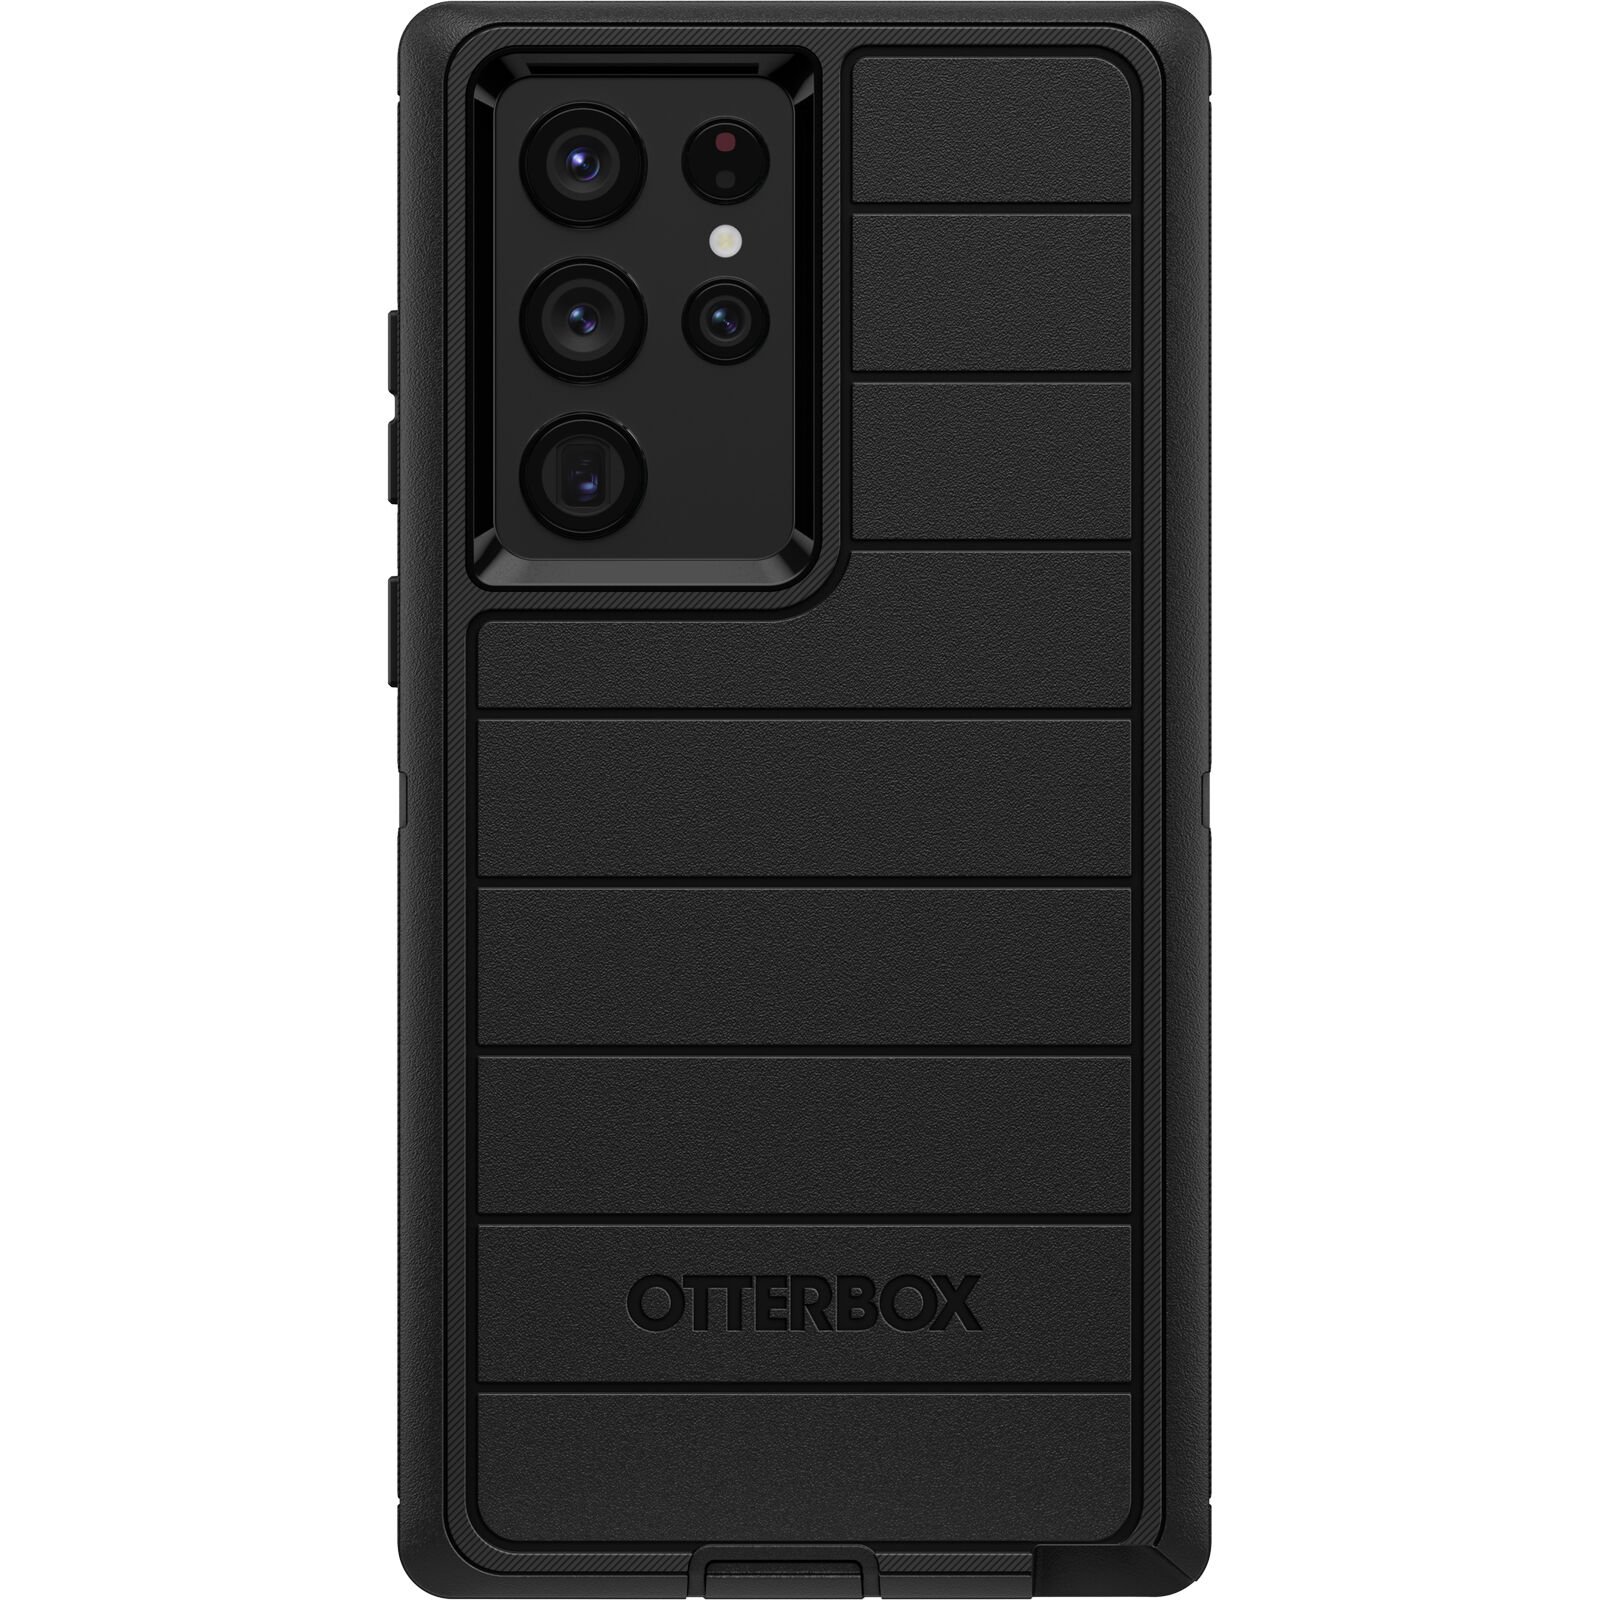 Known for their military standard phone cases, the Ottterbox’s Defender Series also has its version for the Samsung Galaxy S22 Ultra.